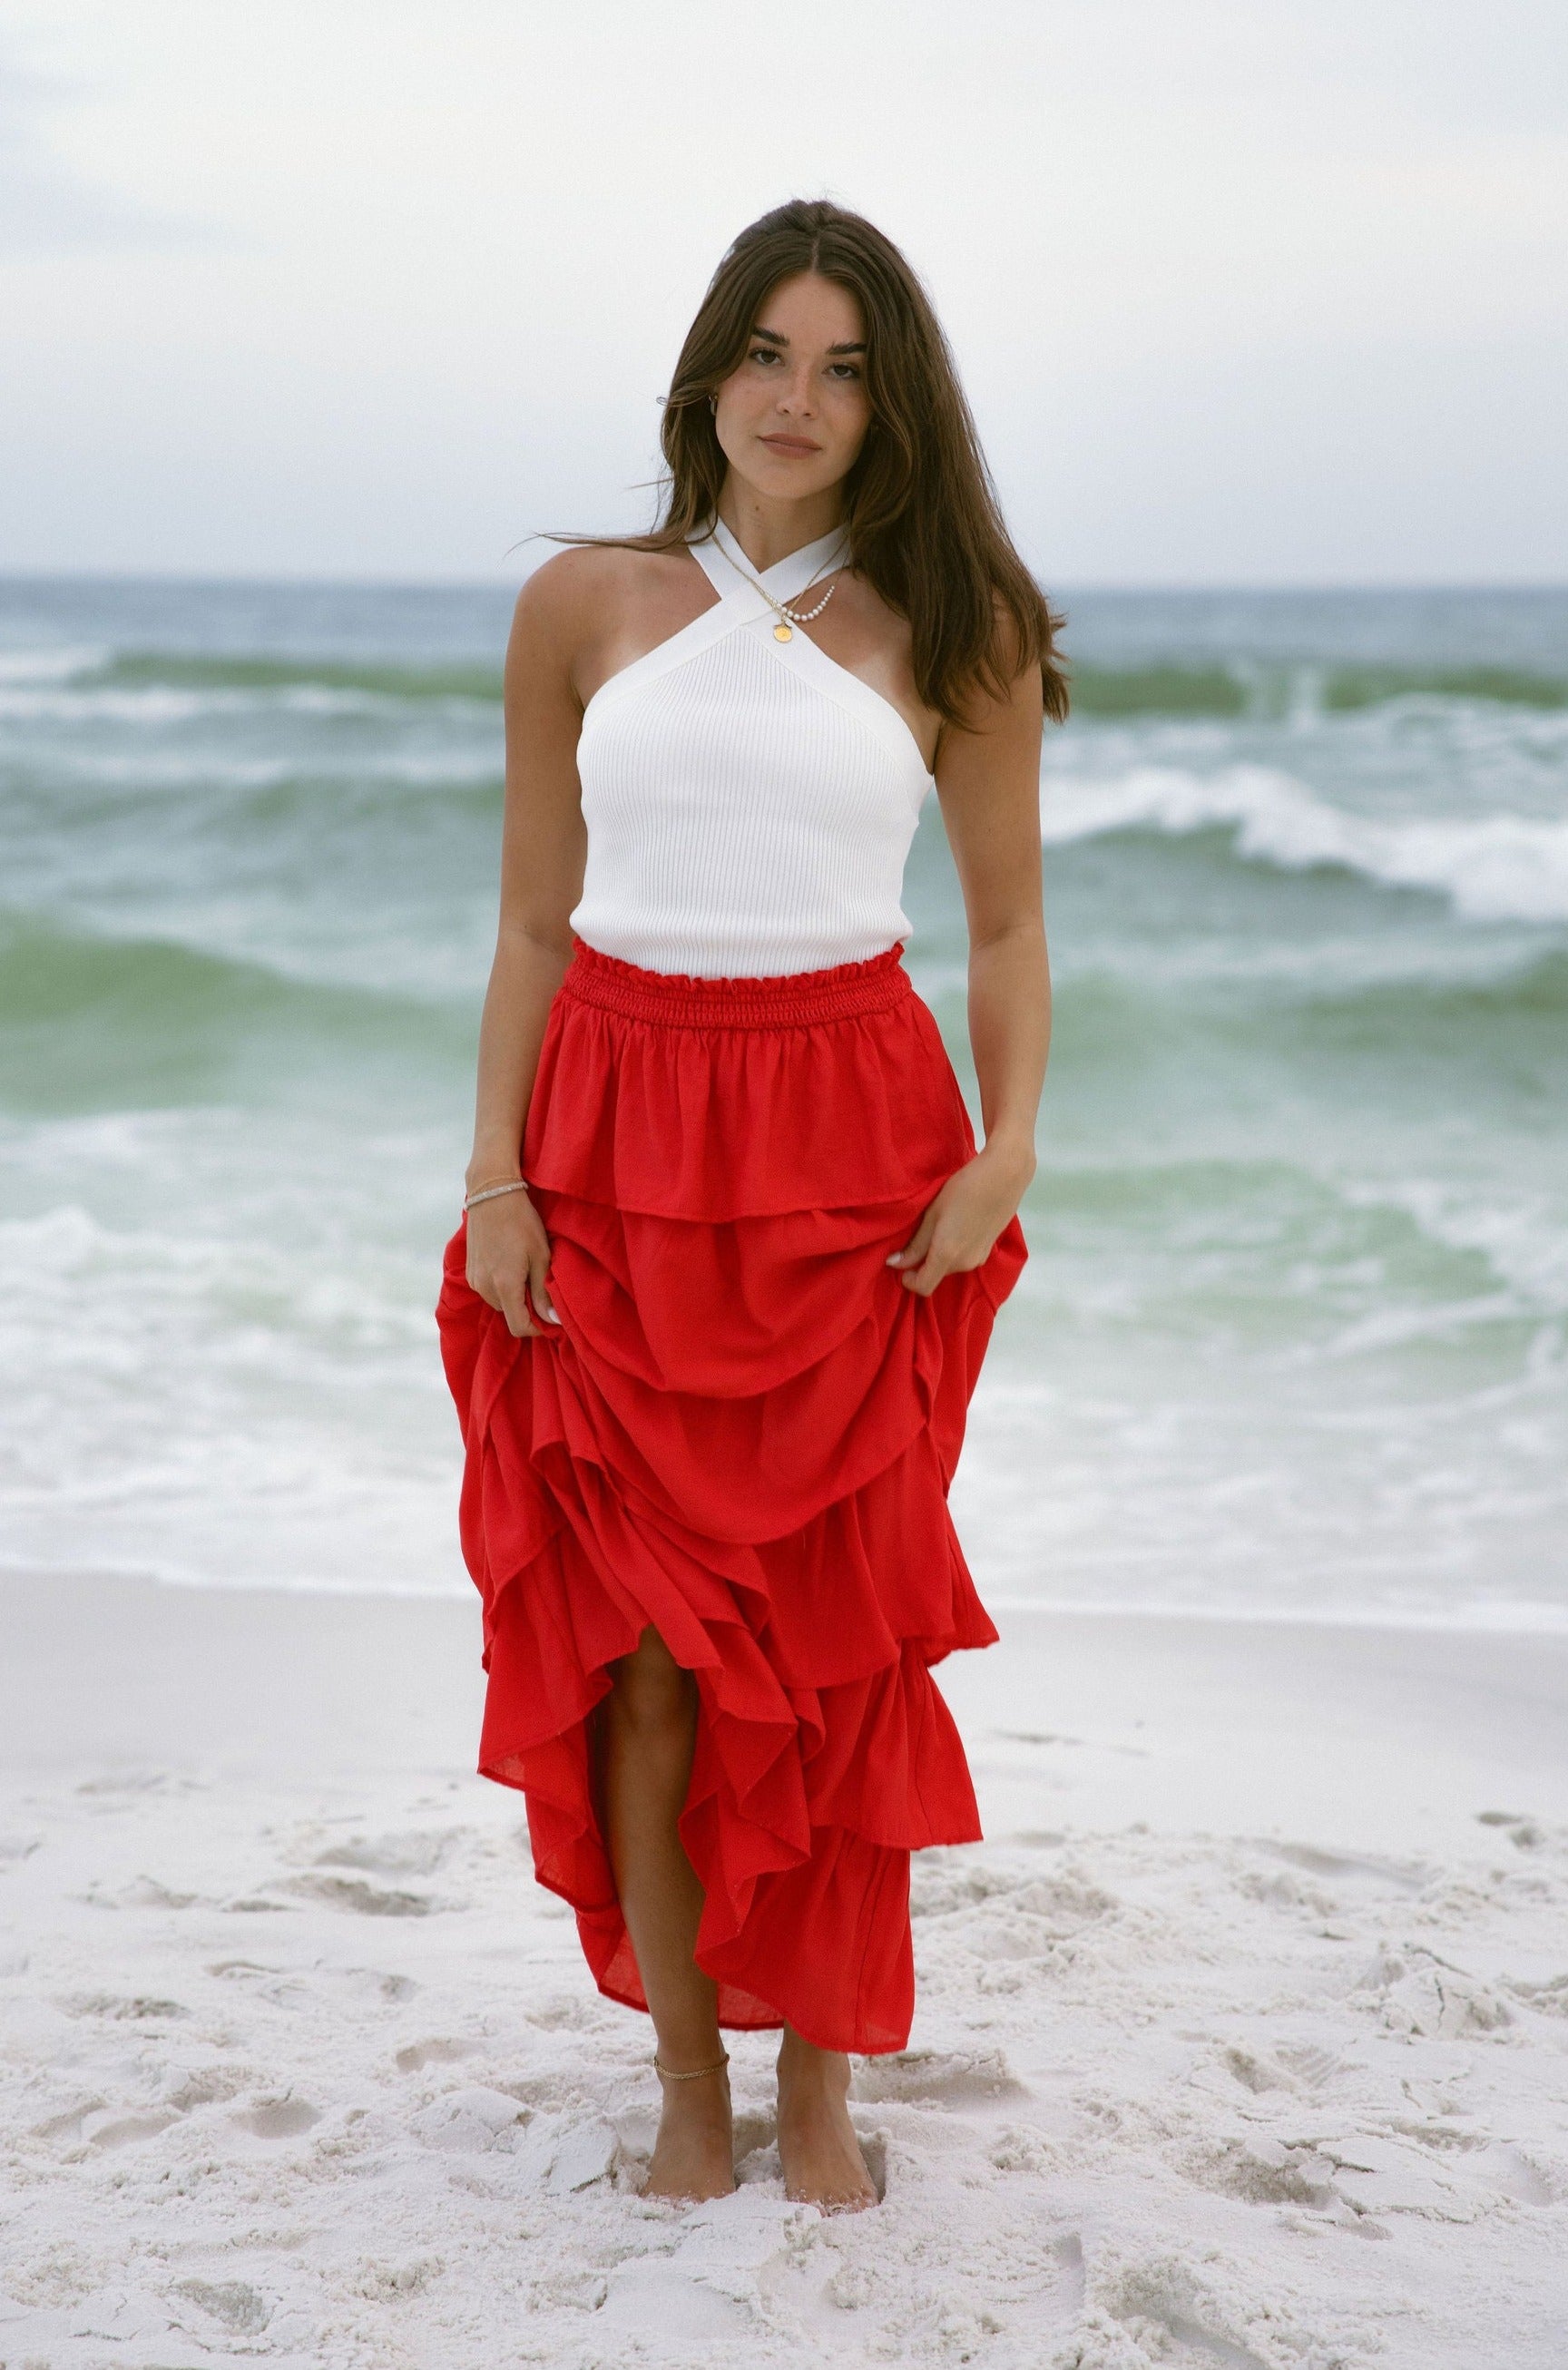 Full body front view of female model wearing the Katrina Tiered Ruffle Maxi Skirt in Red that has tiered red fabric and an elastic waist. Worn with white top tucked in. Model is holding skirt up.